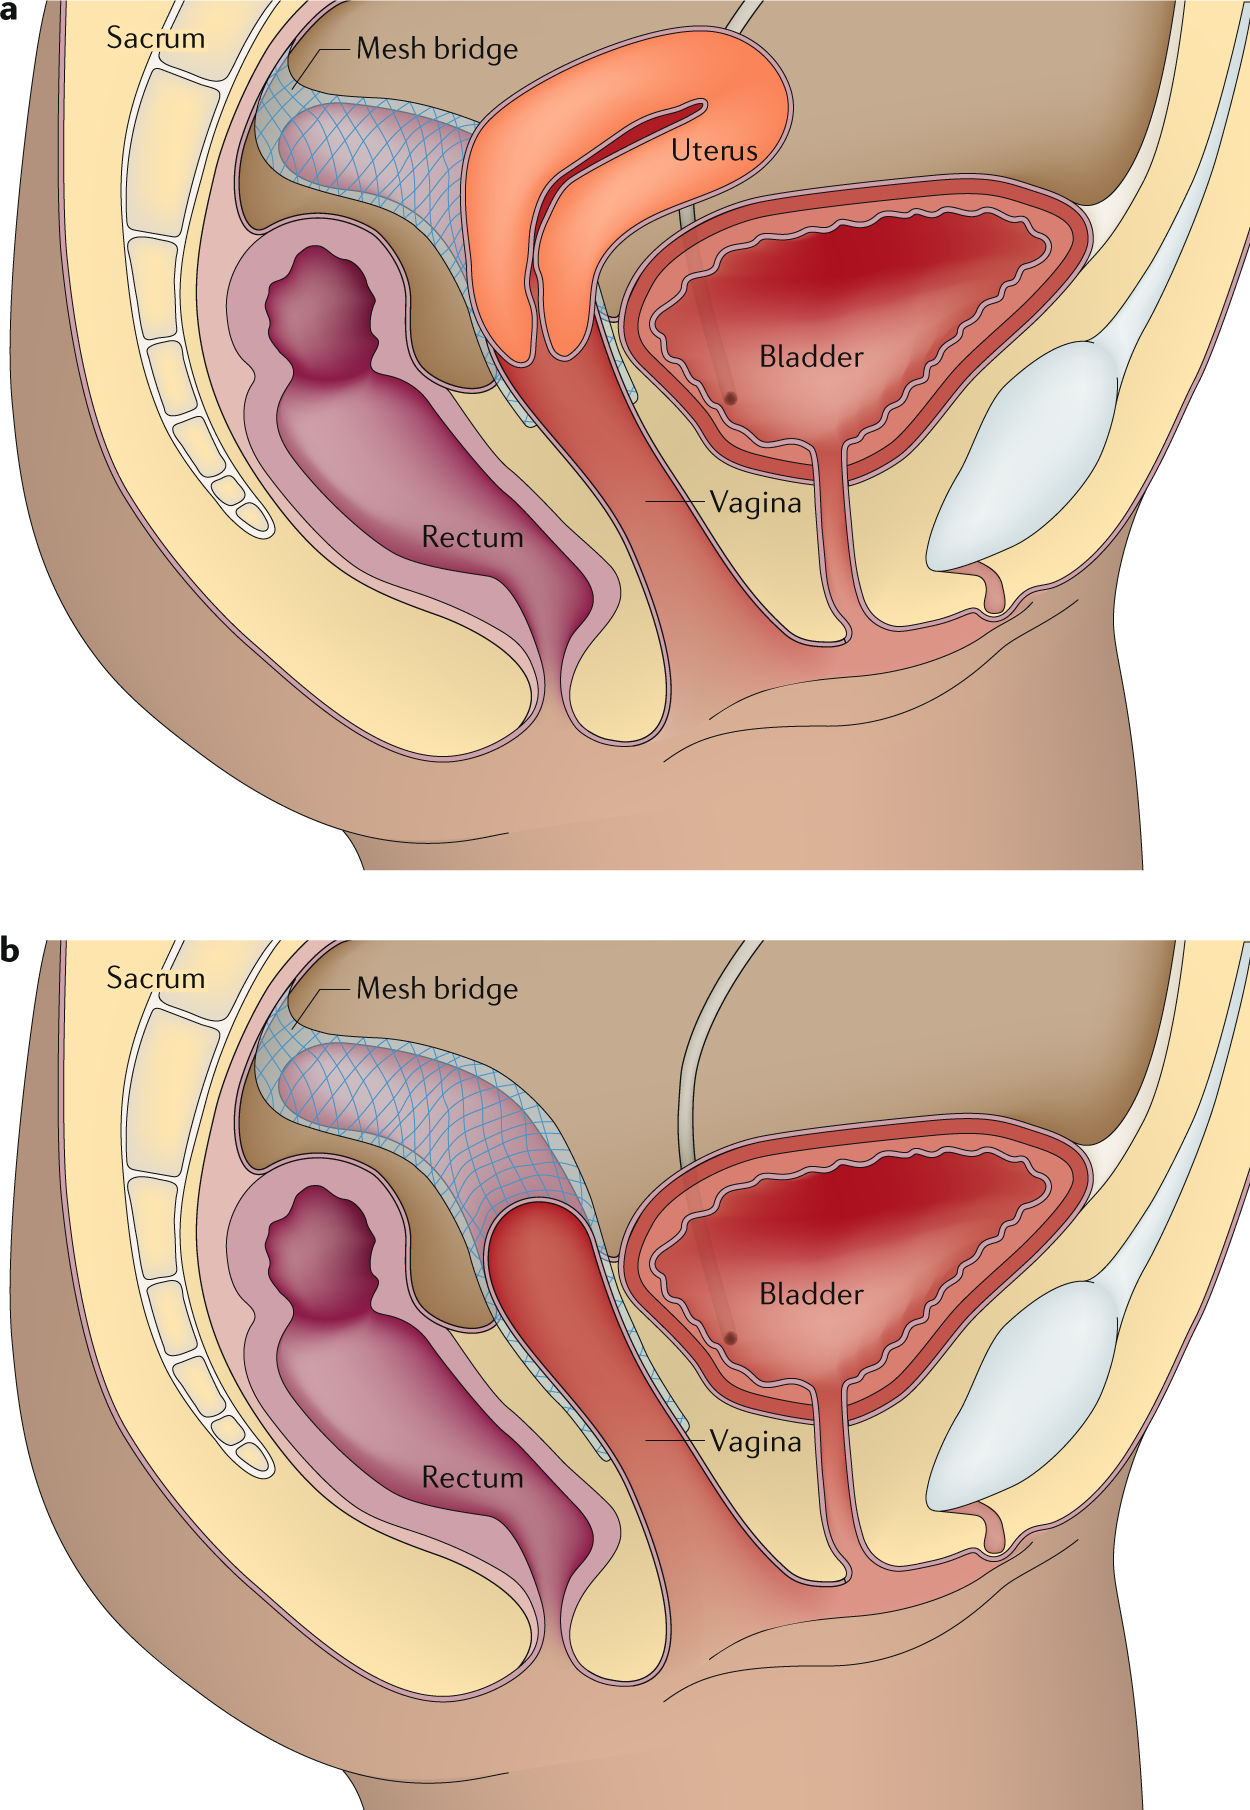 Pelvic organ prolapse and sexual function Nature Reviews Urology